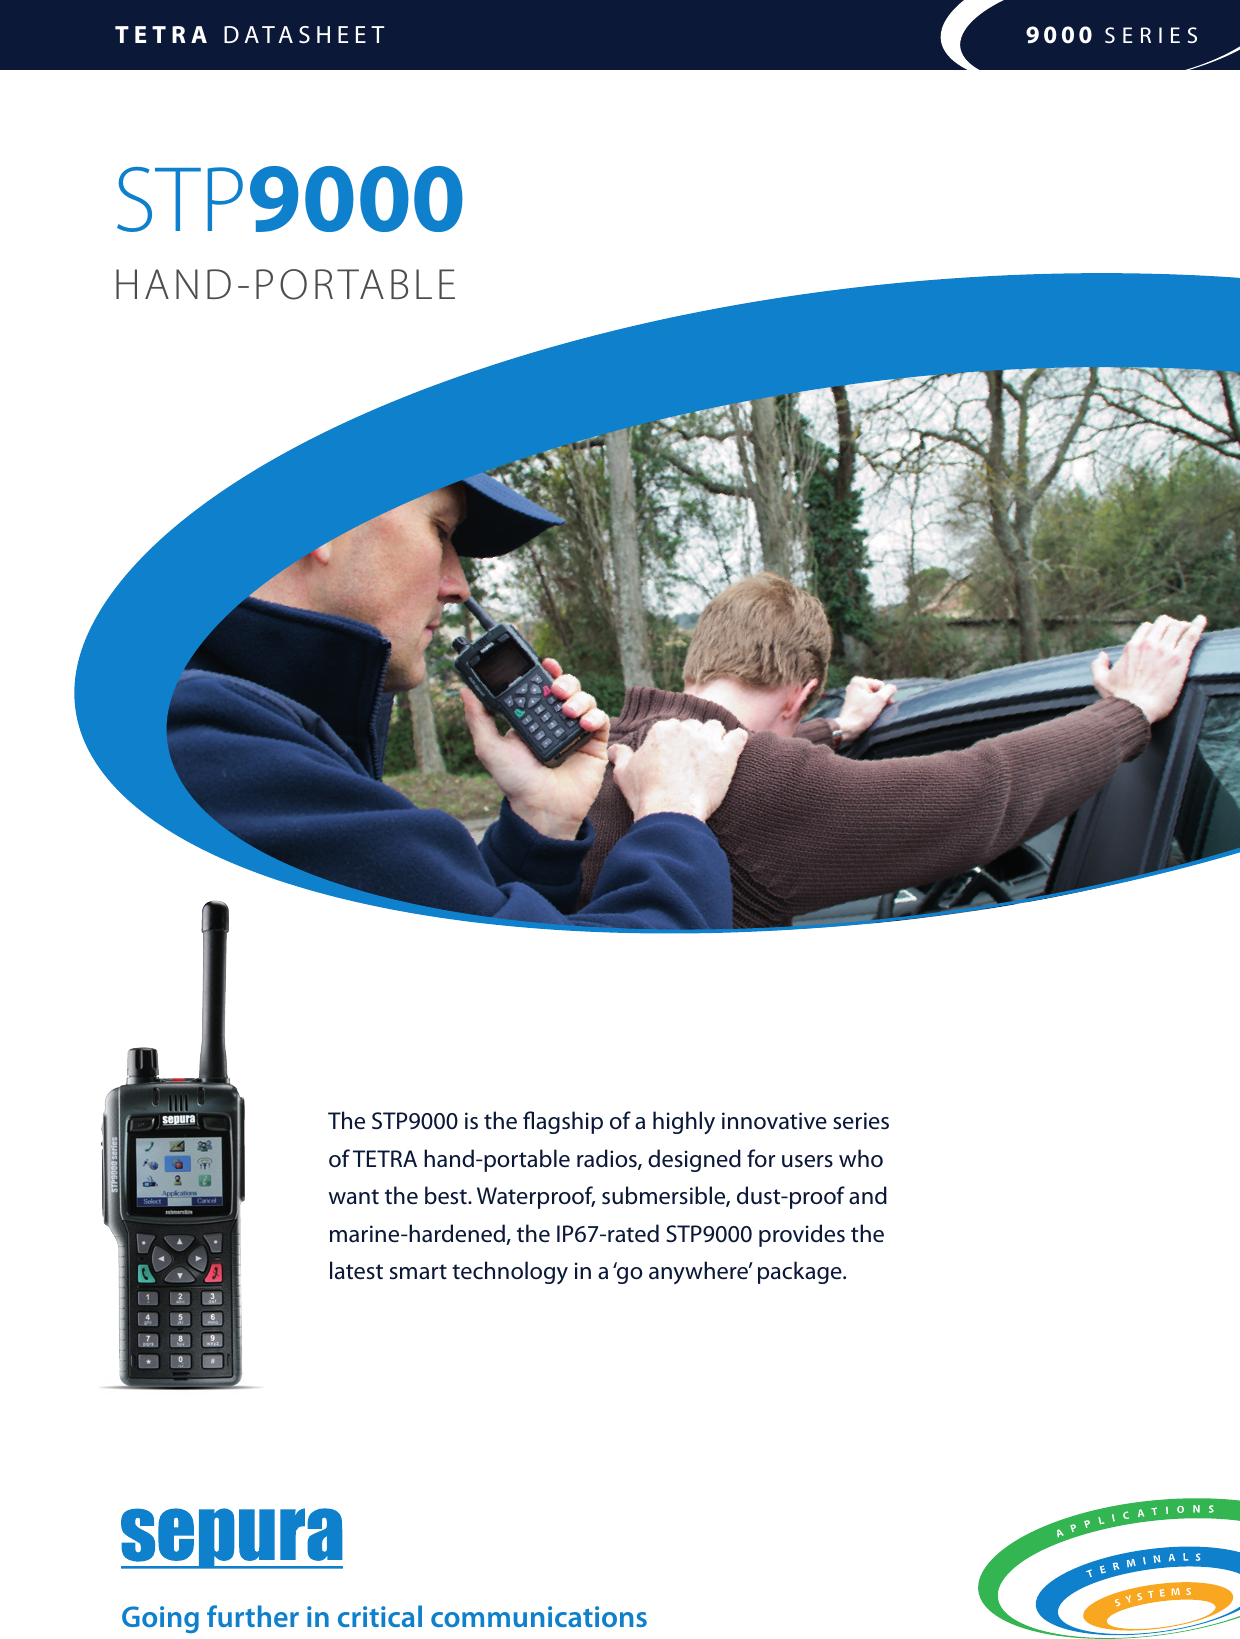 TETRA DATASHEET 9000 SERIESThe STP9000 is the agship of a highly innovative series  of TETRA hand-portable radios, designed for users who  want the best. Waterproof, submersible, dust-proof and marine-hardened, the IP67-rated STP9000 provides the  latest smart technology in a ‘go anywhere’ package.Going further in critical communicationsSTP9000HAND-PORTABLE